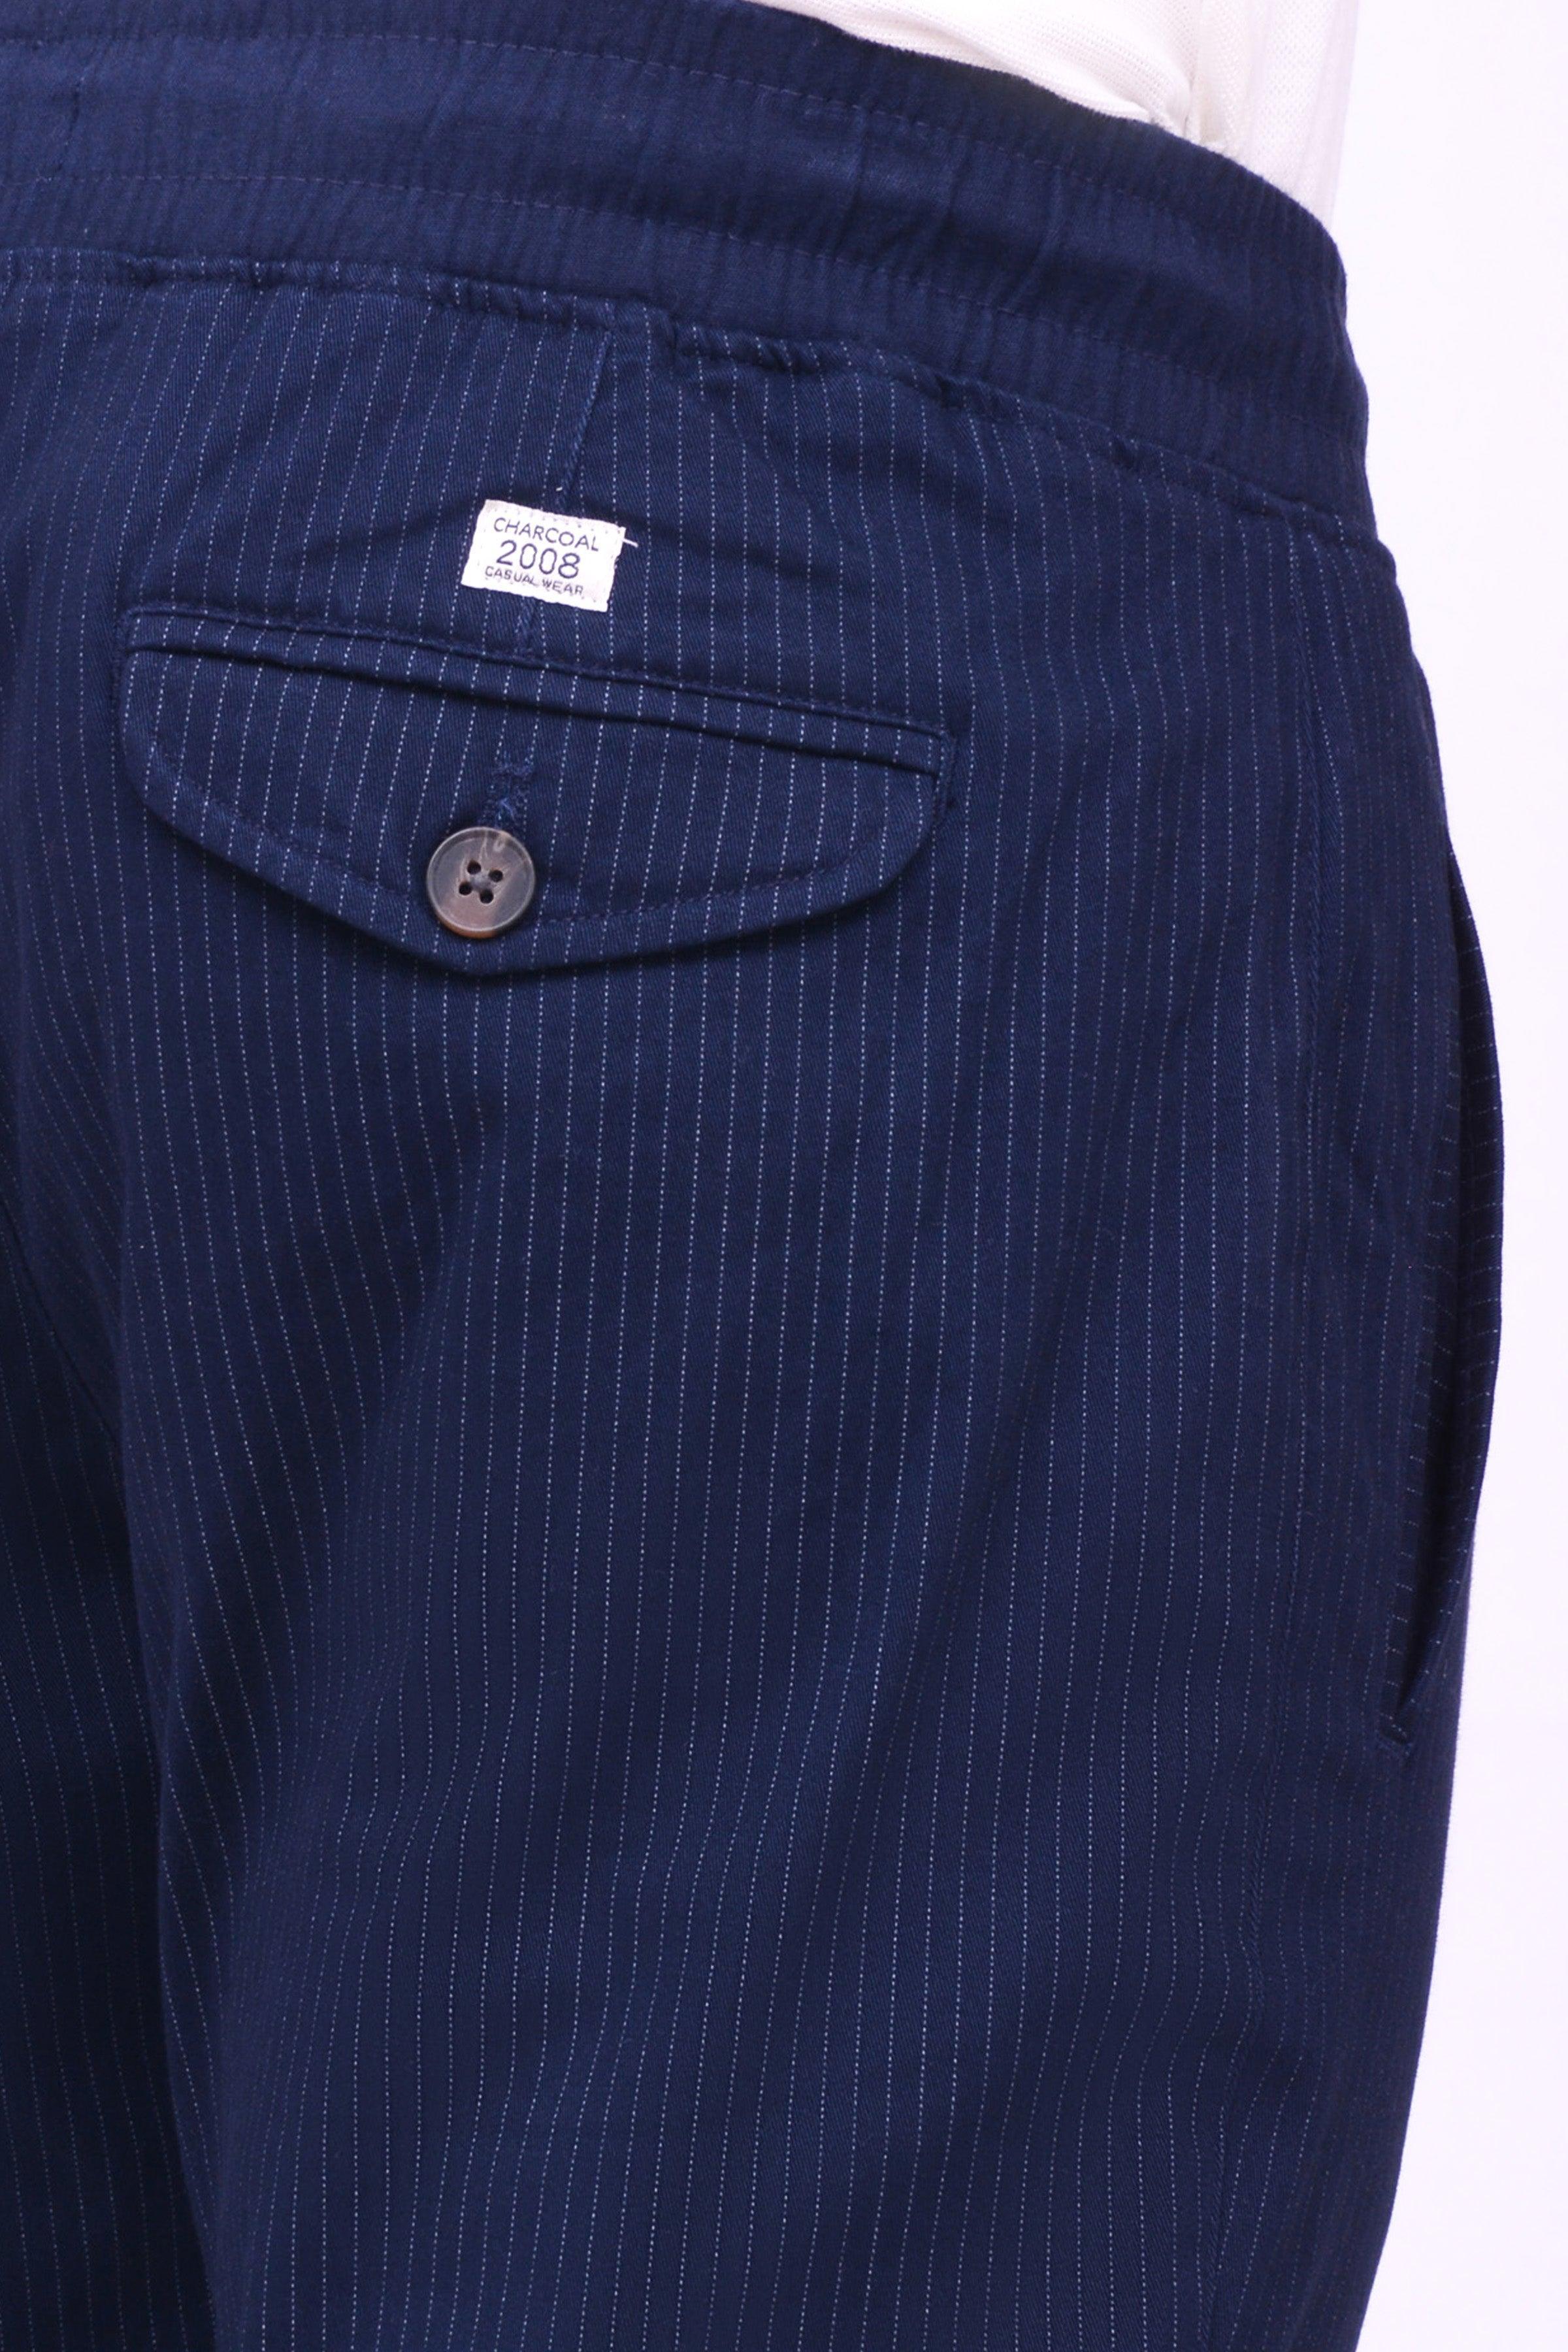 CASUAL JOGGER TROUSER NAVY at Charcoal Clothing